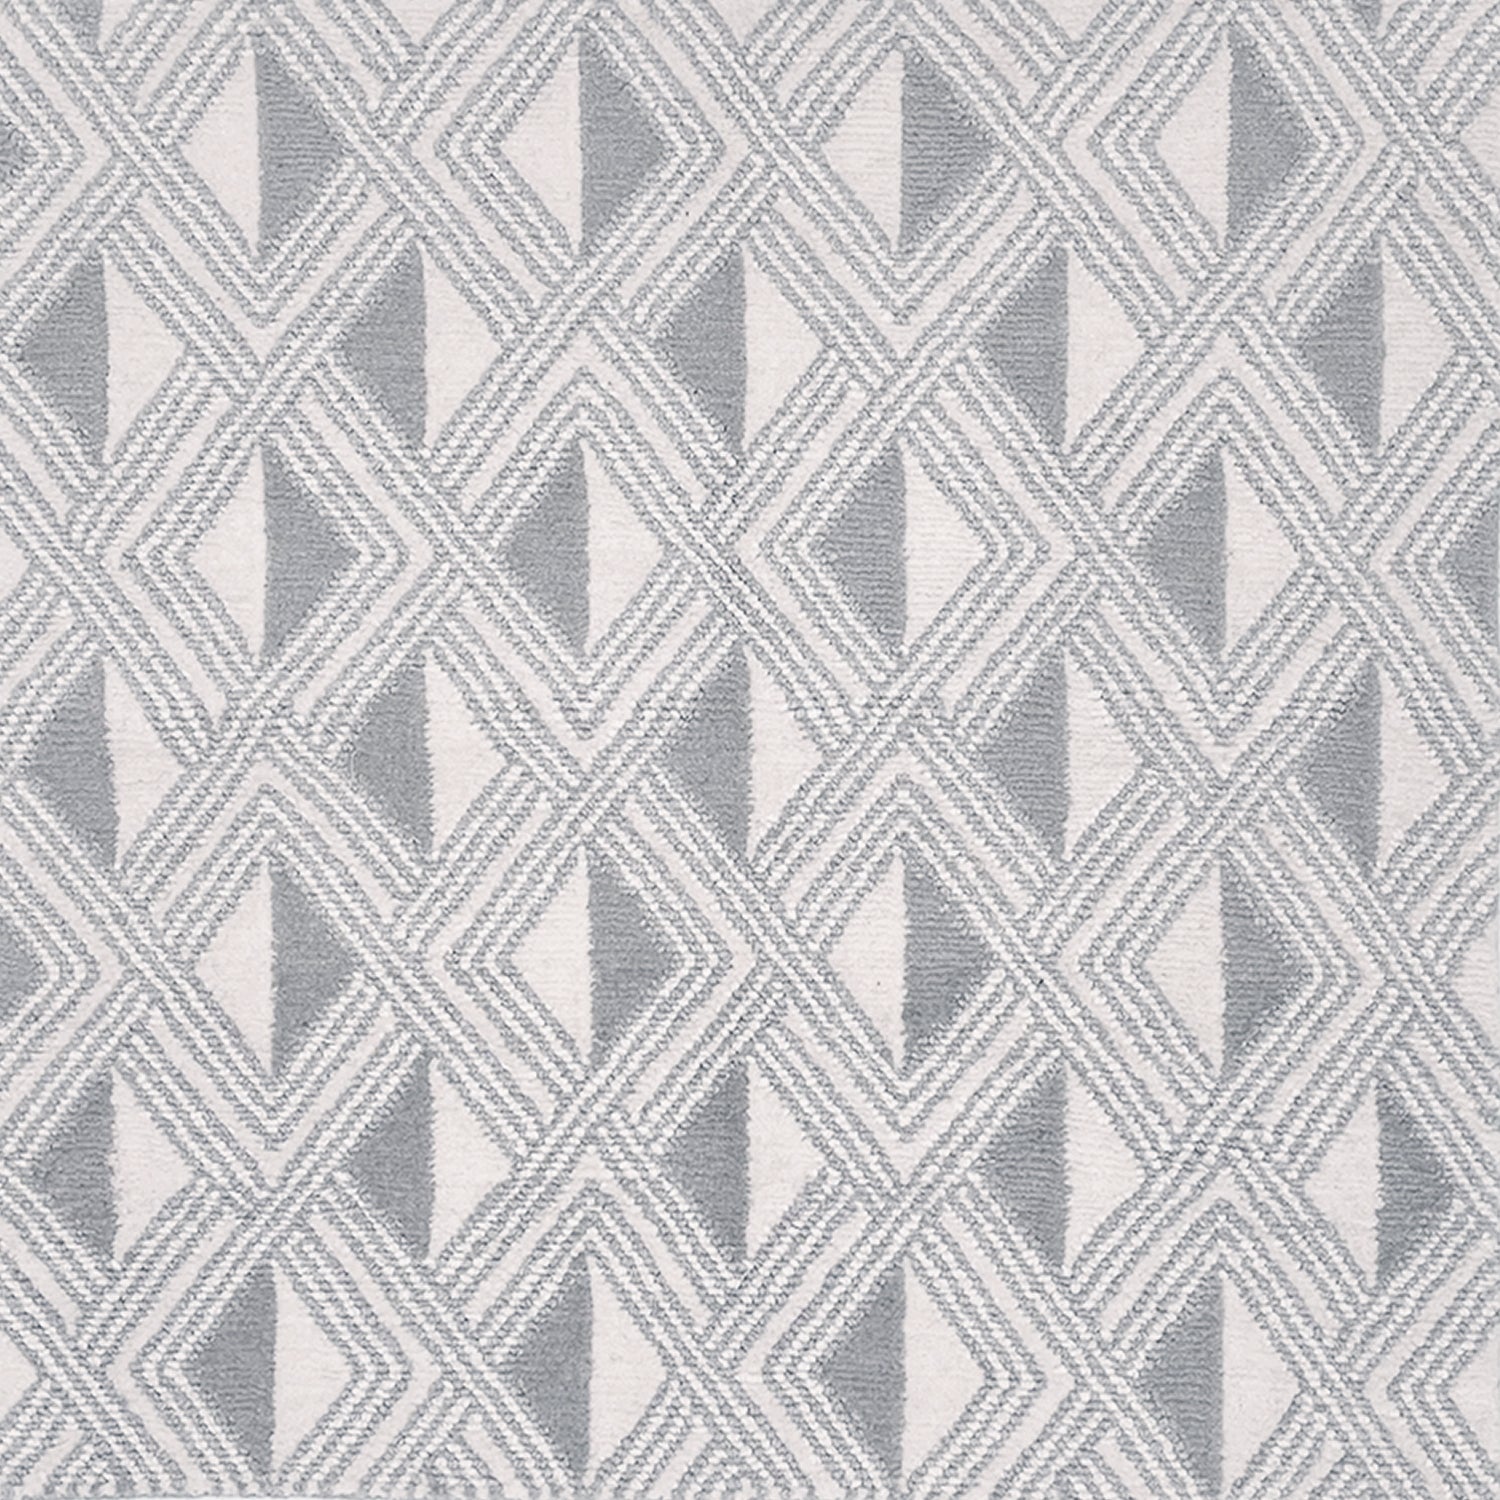 Detail of a woven high-pile rug in an interlocking diamond pattern in gray and white.